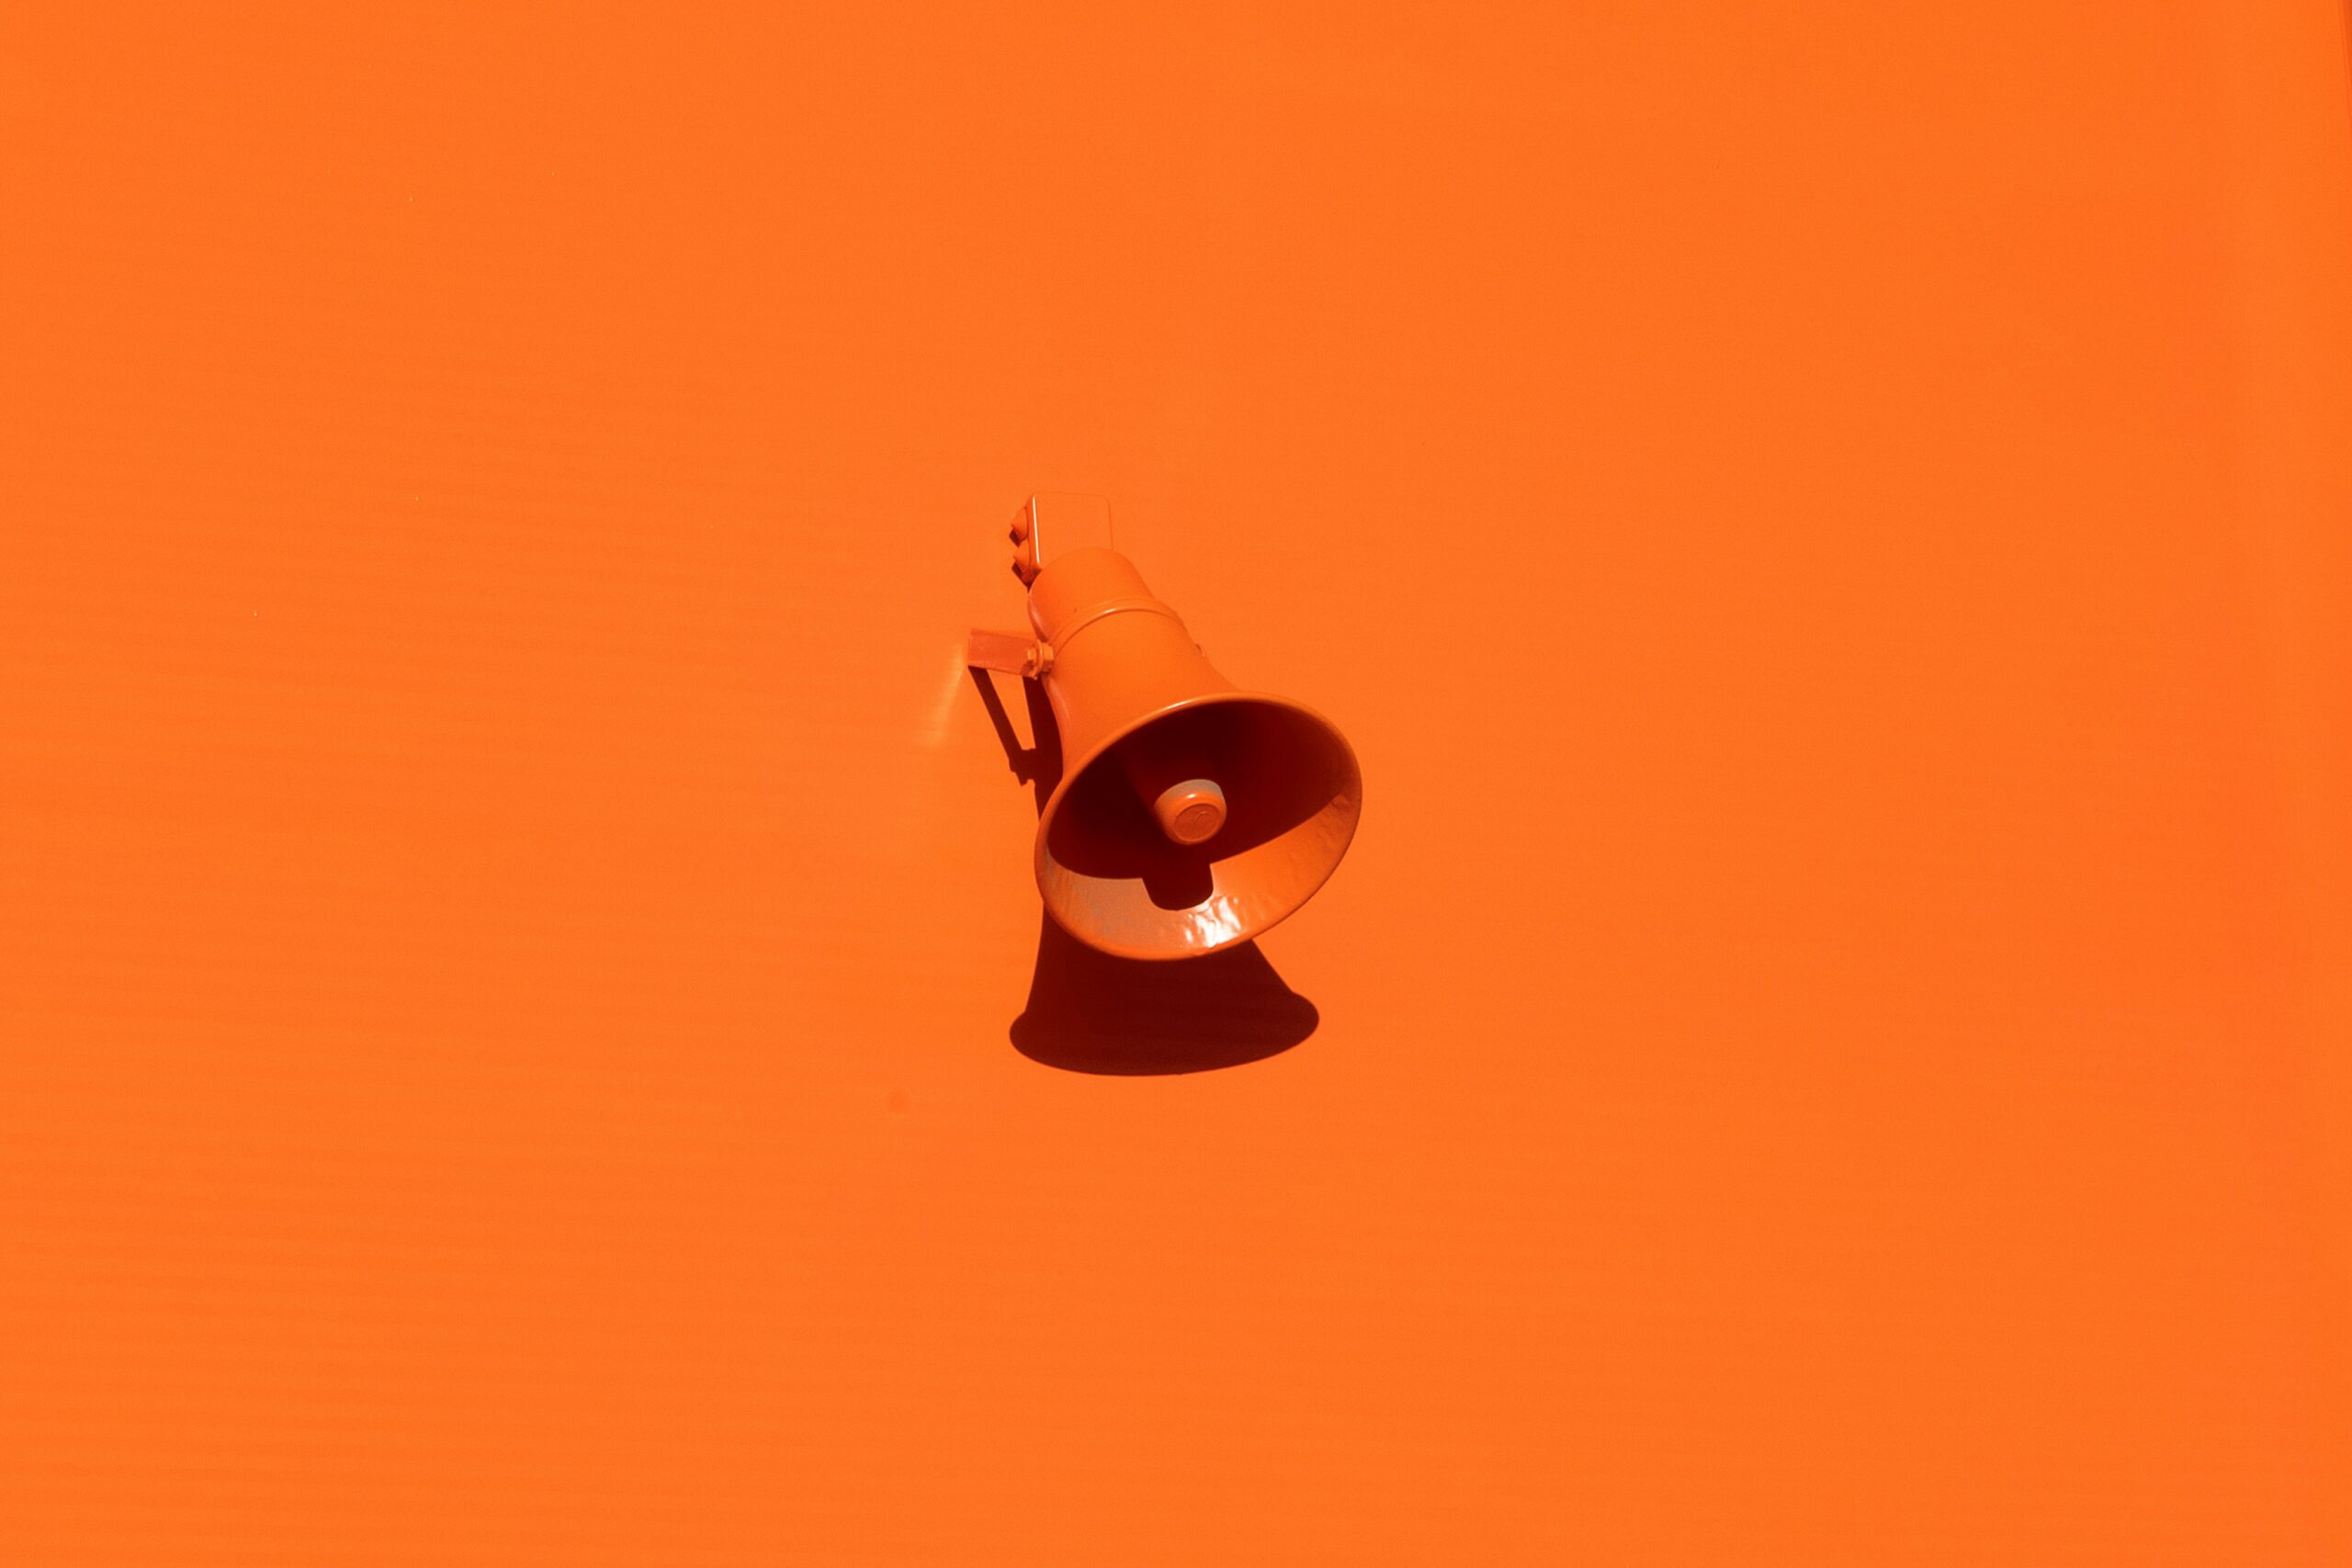 An orange megaphone pictured in front of an orange background.